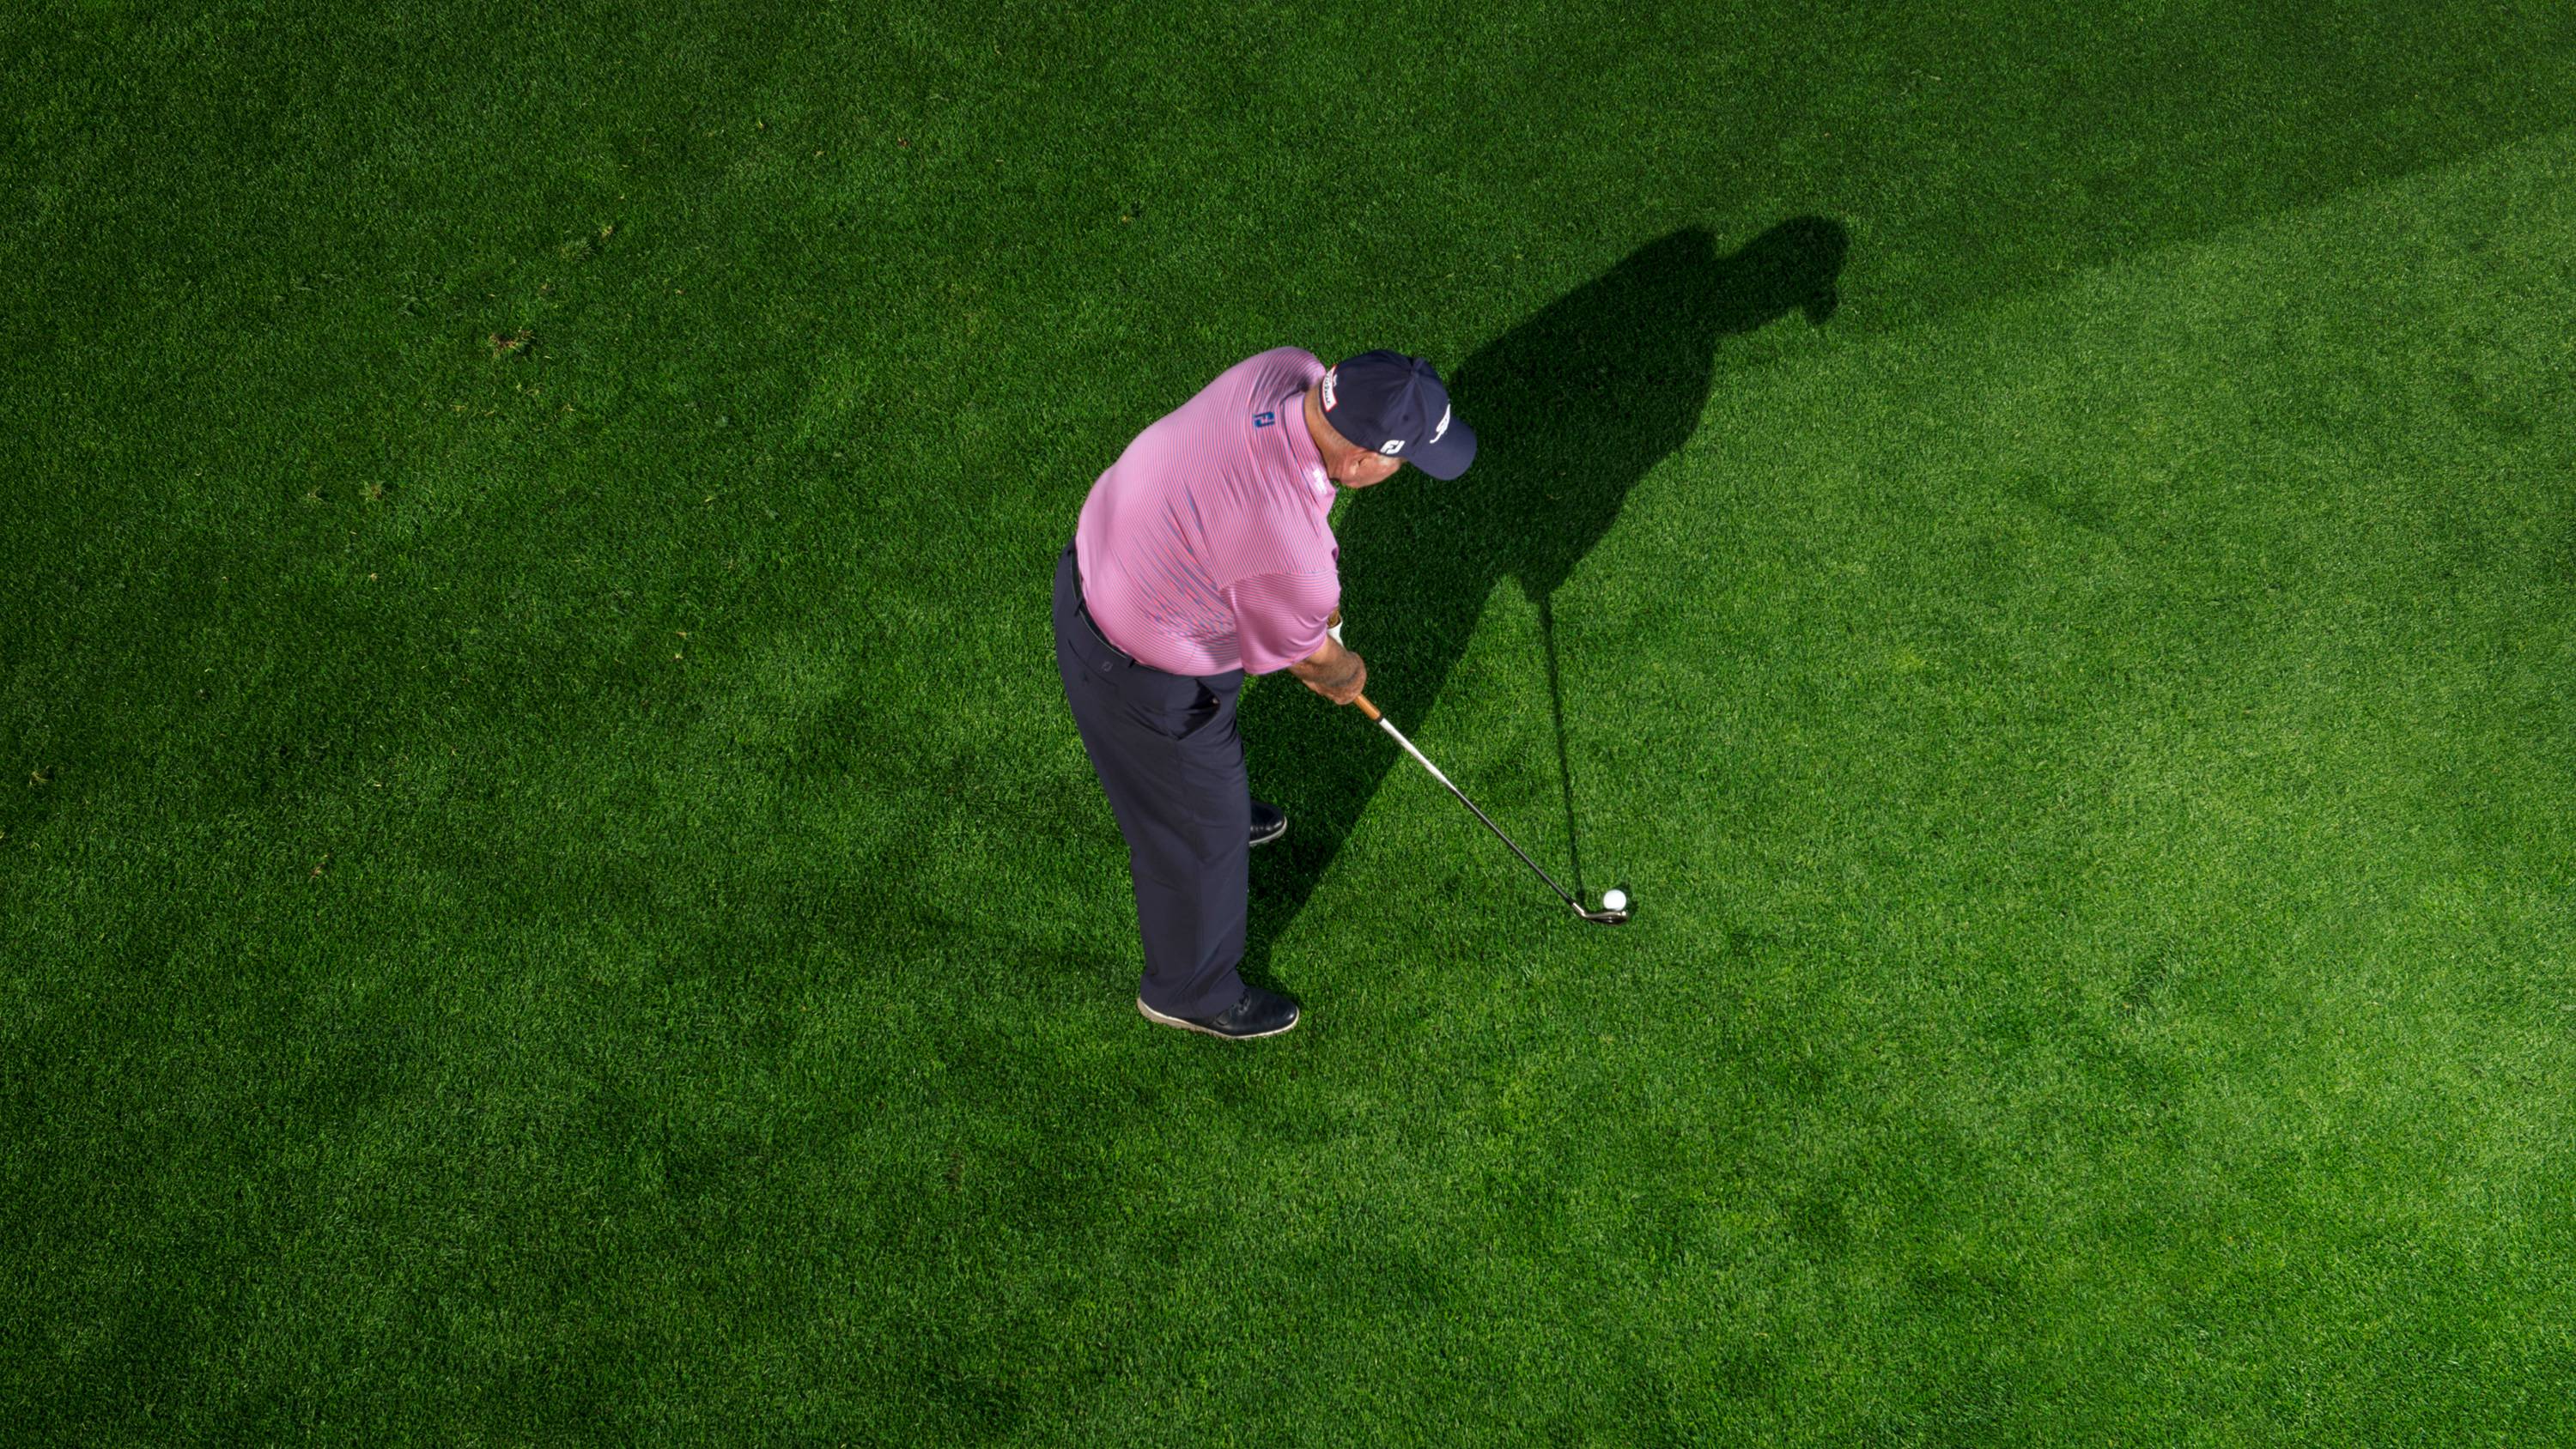 How to Improve Golf Consistency
